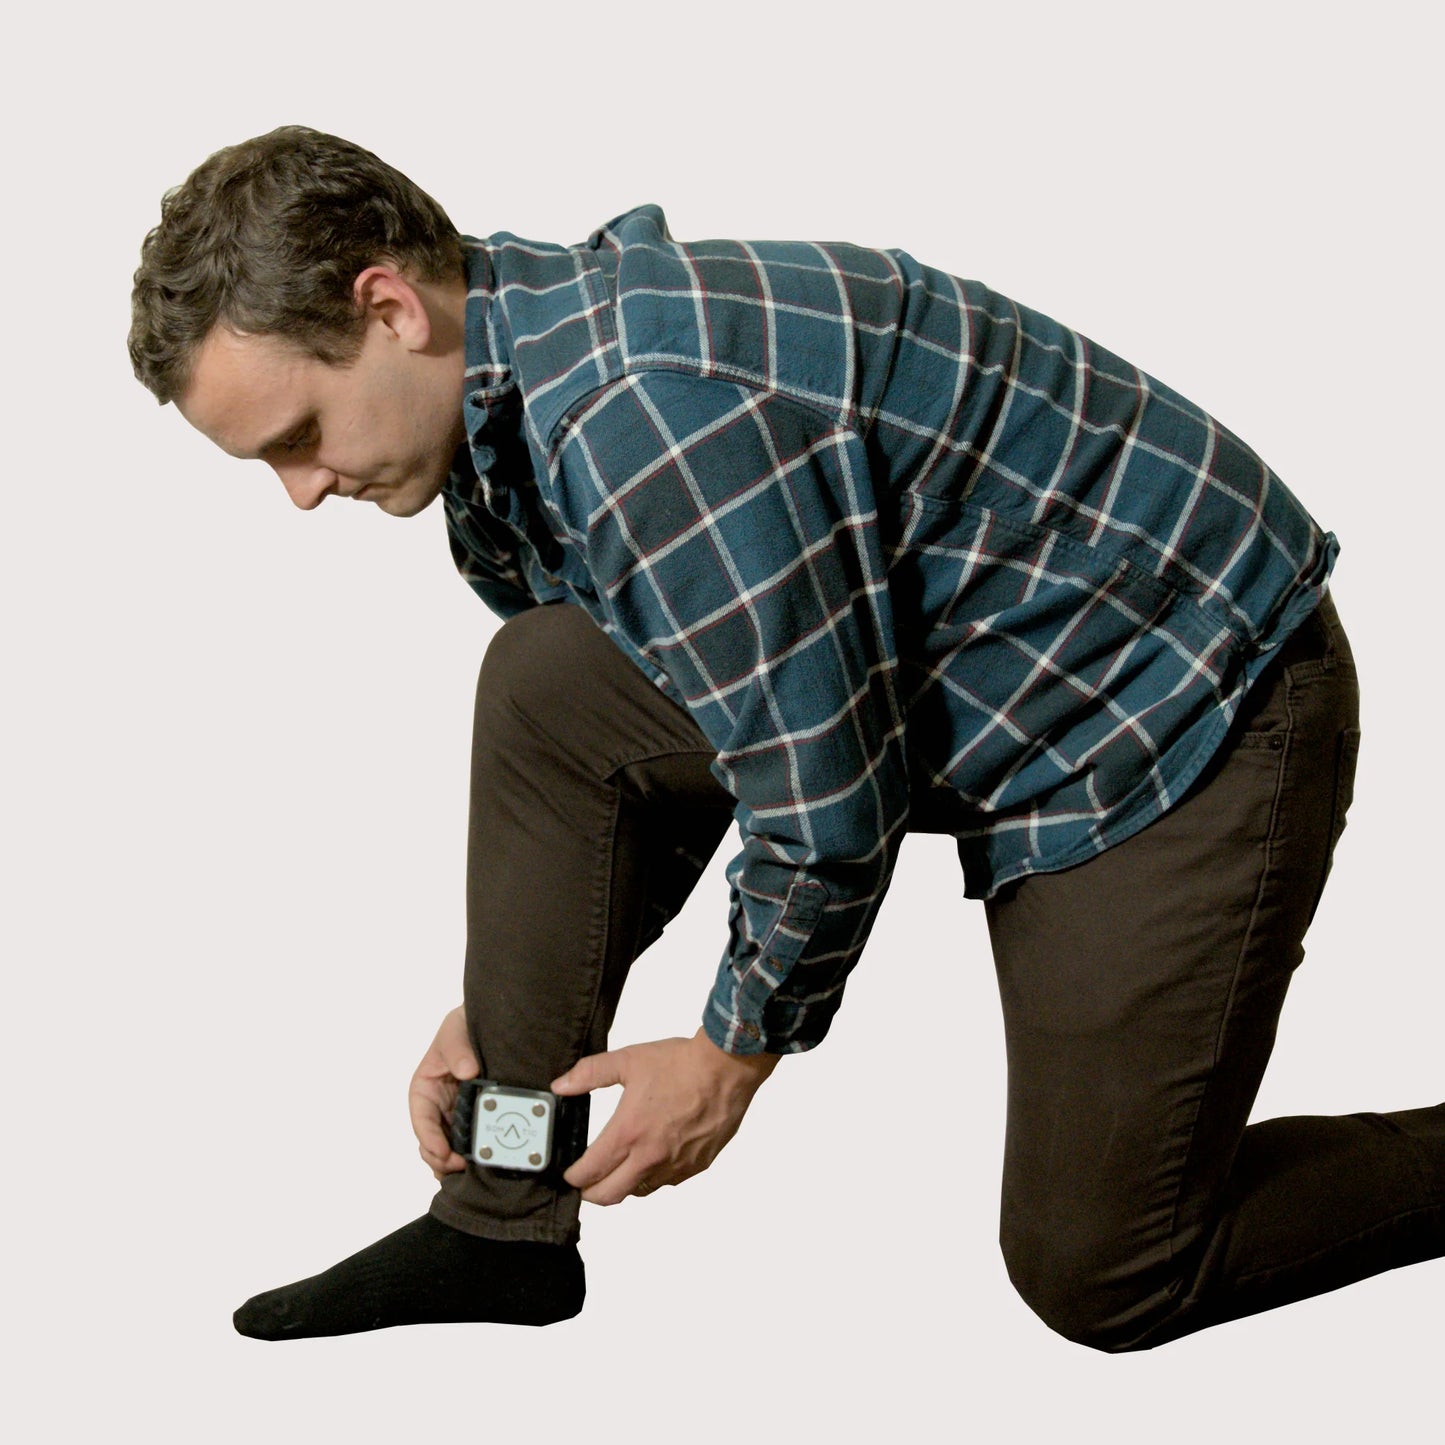 EROS Trackers can be placed on the ankle with an elastic strap and adapter to capture rotation data that can be used to calculate motion data for full-body tracking in virtual reality applications.